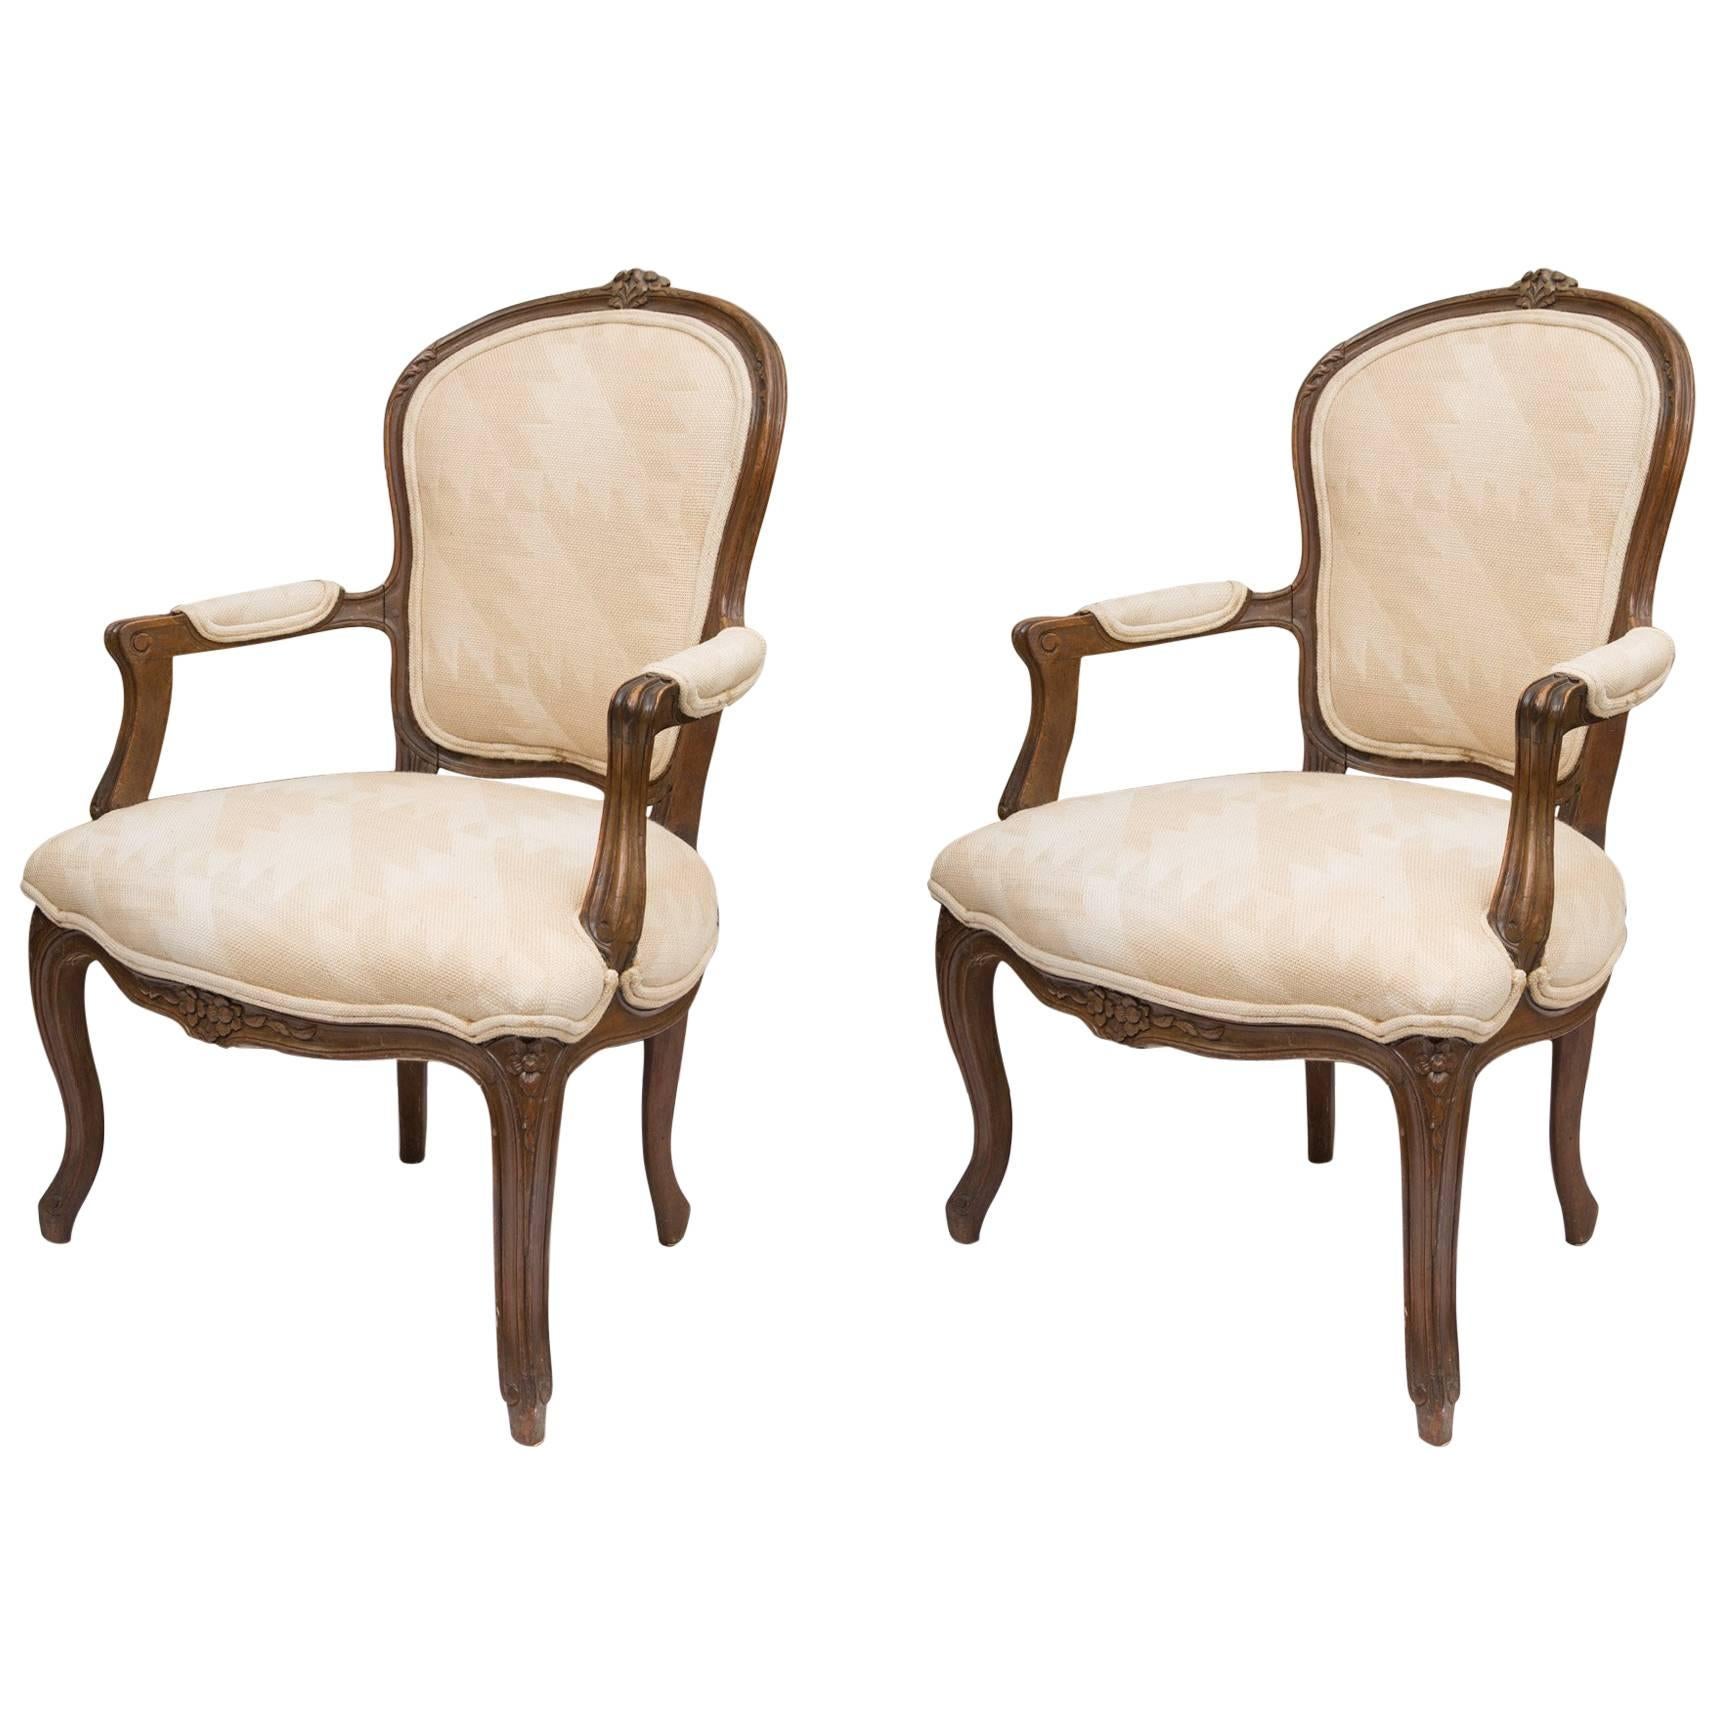 Pair of French Walnut Fauteuil Upholstered Chairs